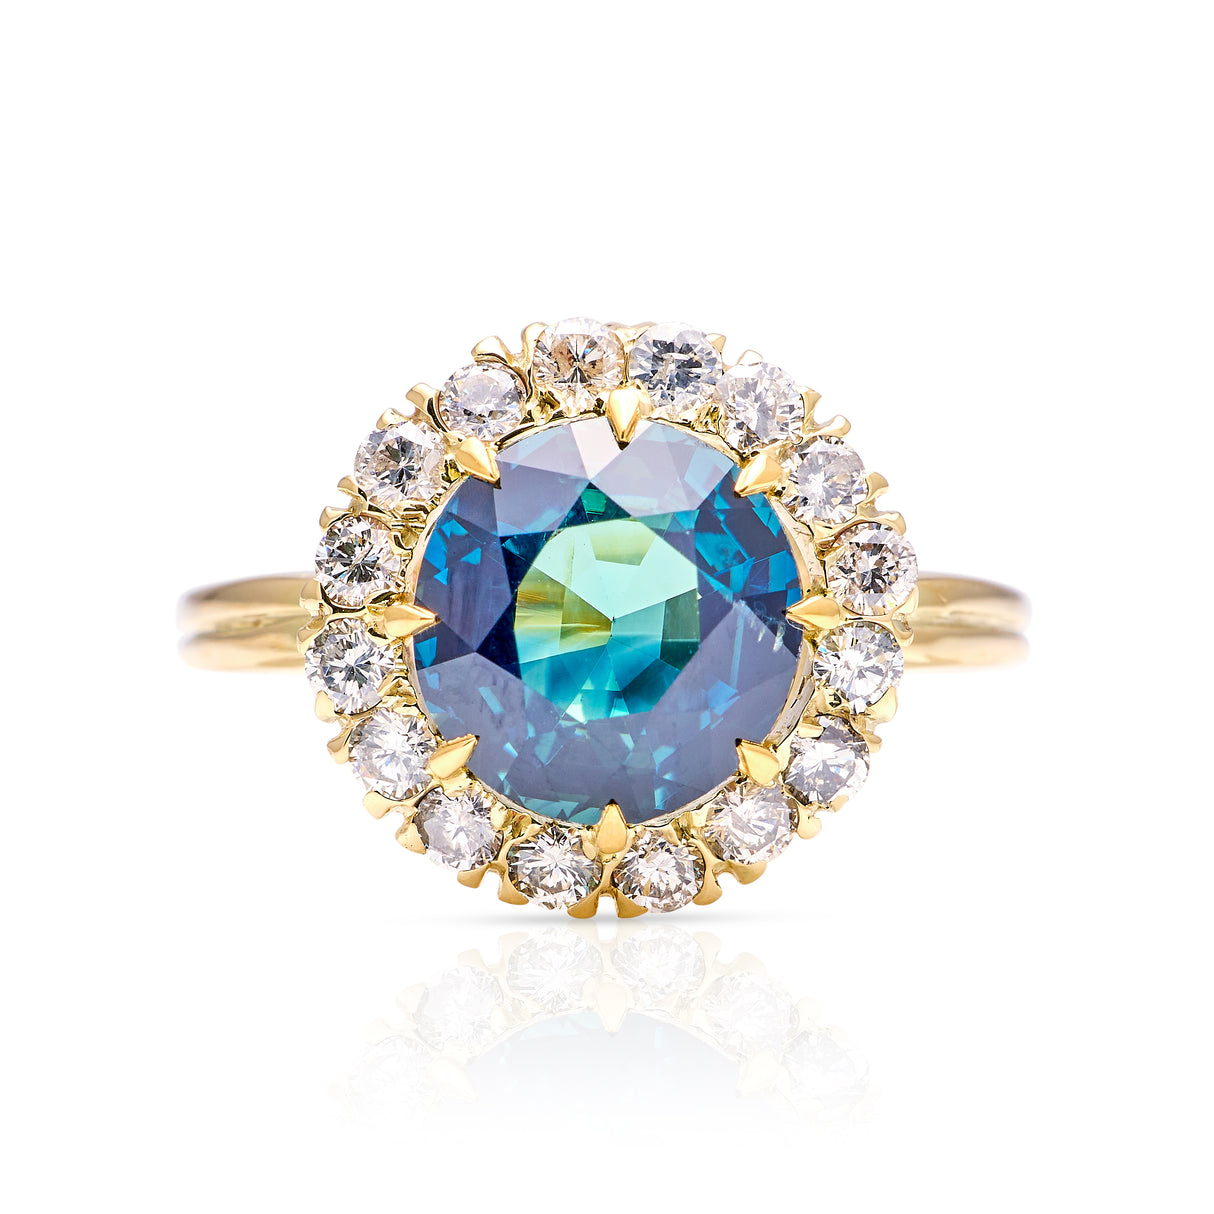 Vintage, teal blue sapphire and diamond cluster ring, 18ct yellow gold